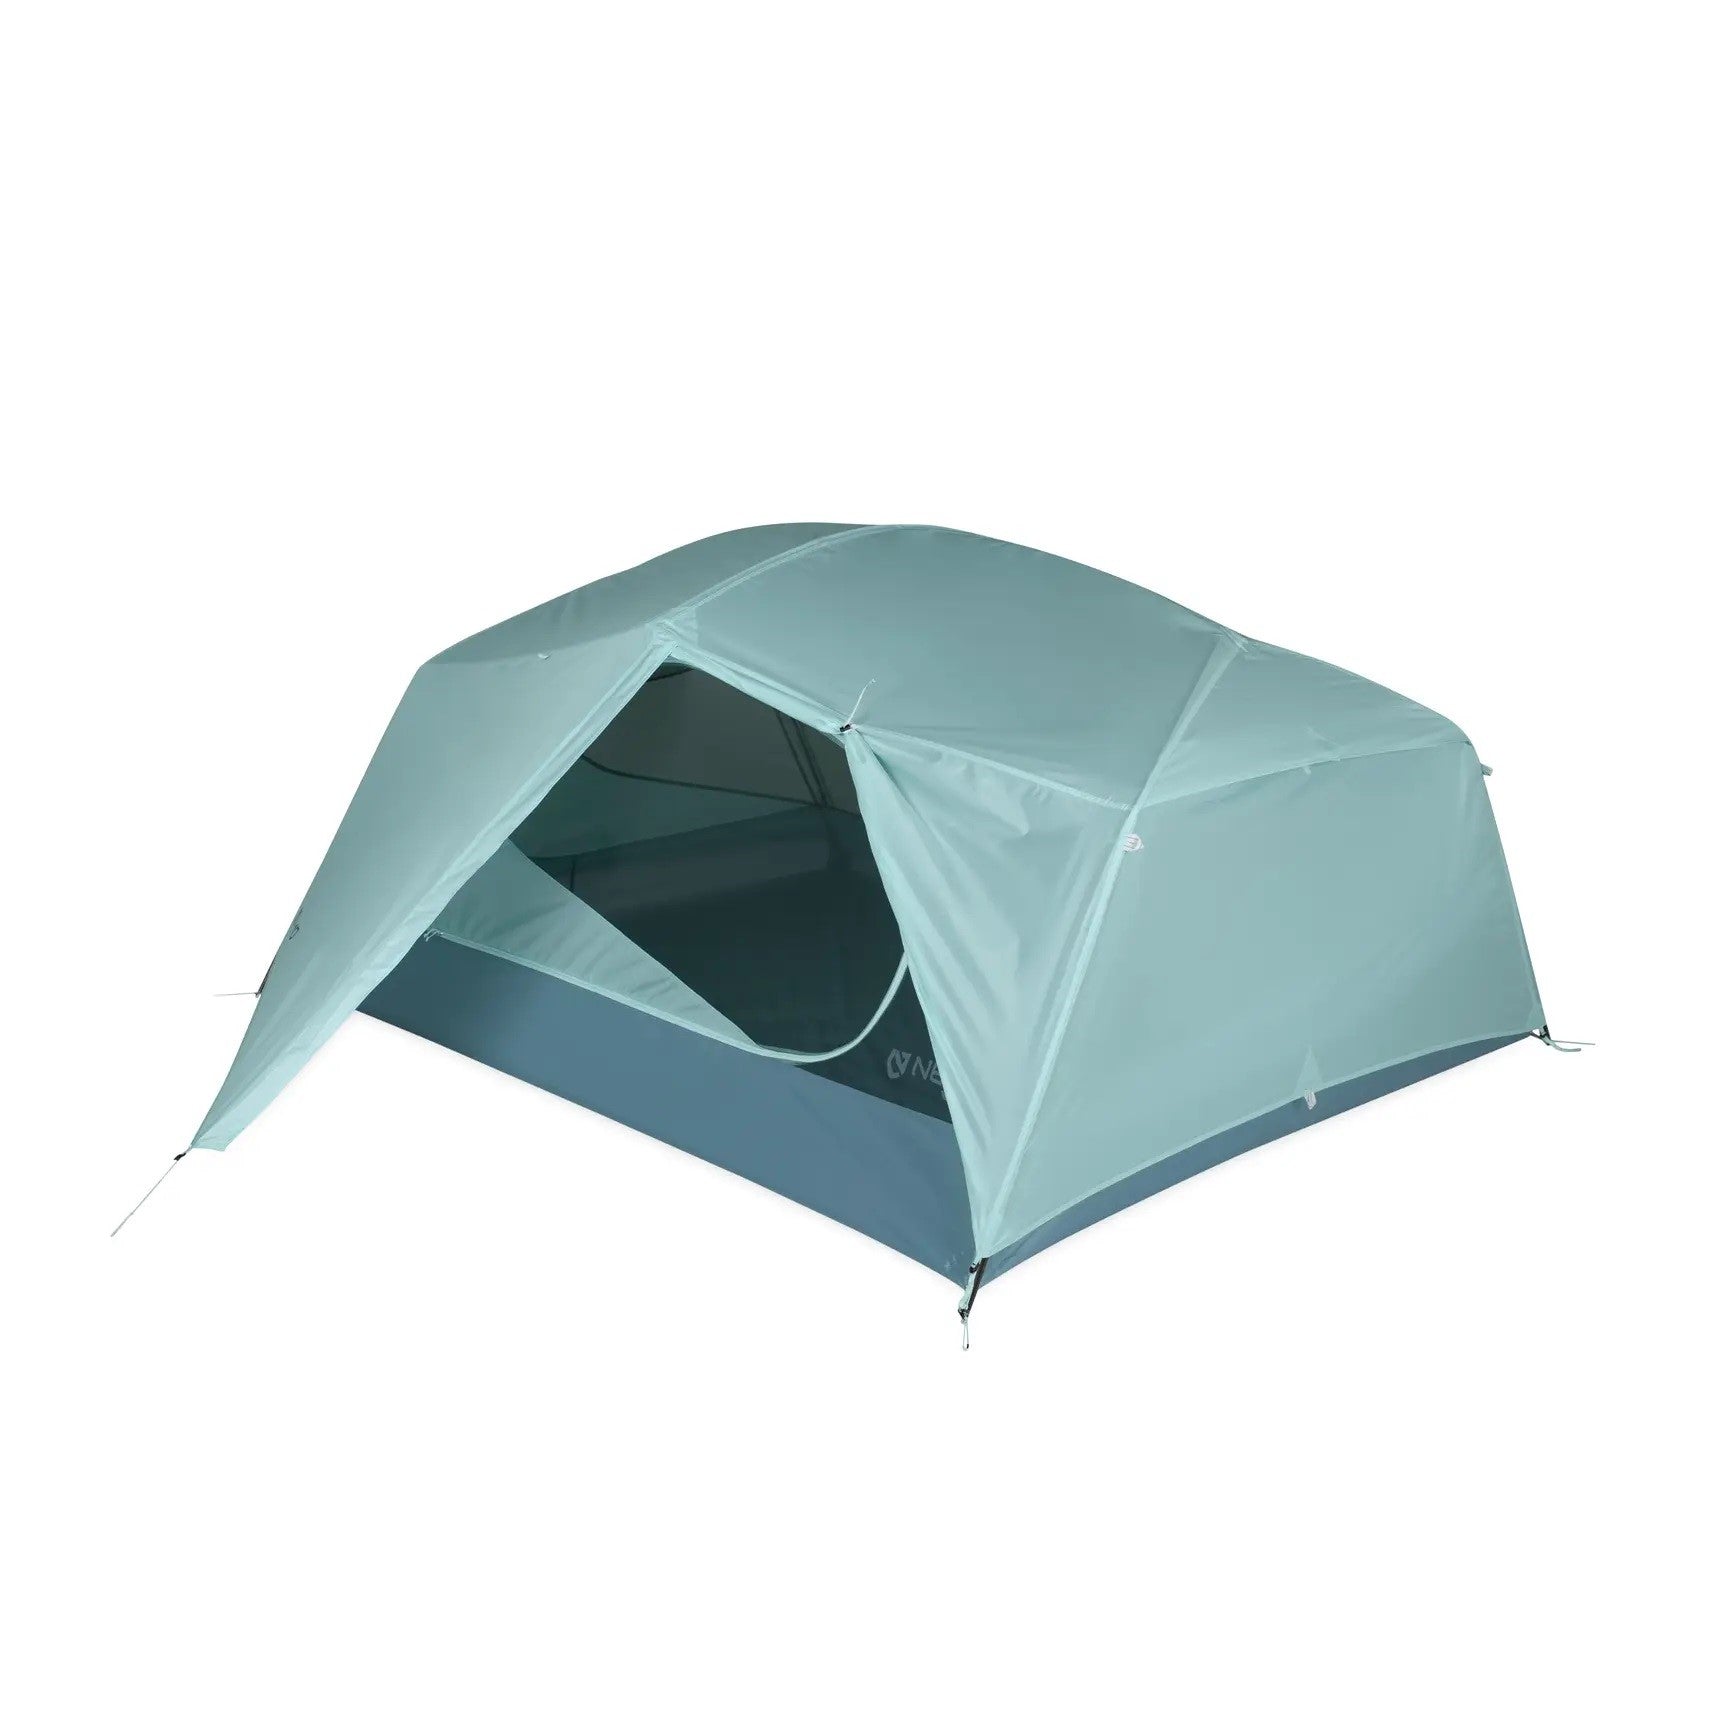 NEMO Aurora Backpacking Tent & Footprint - 3 Person